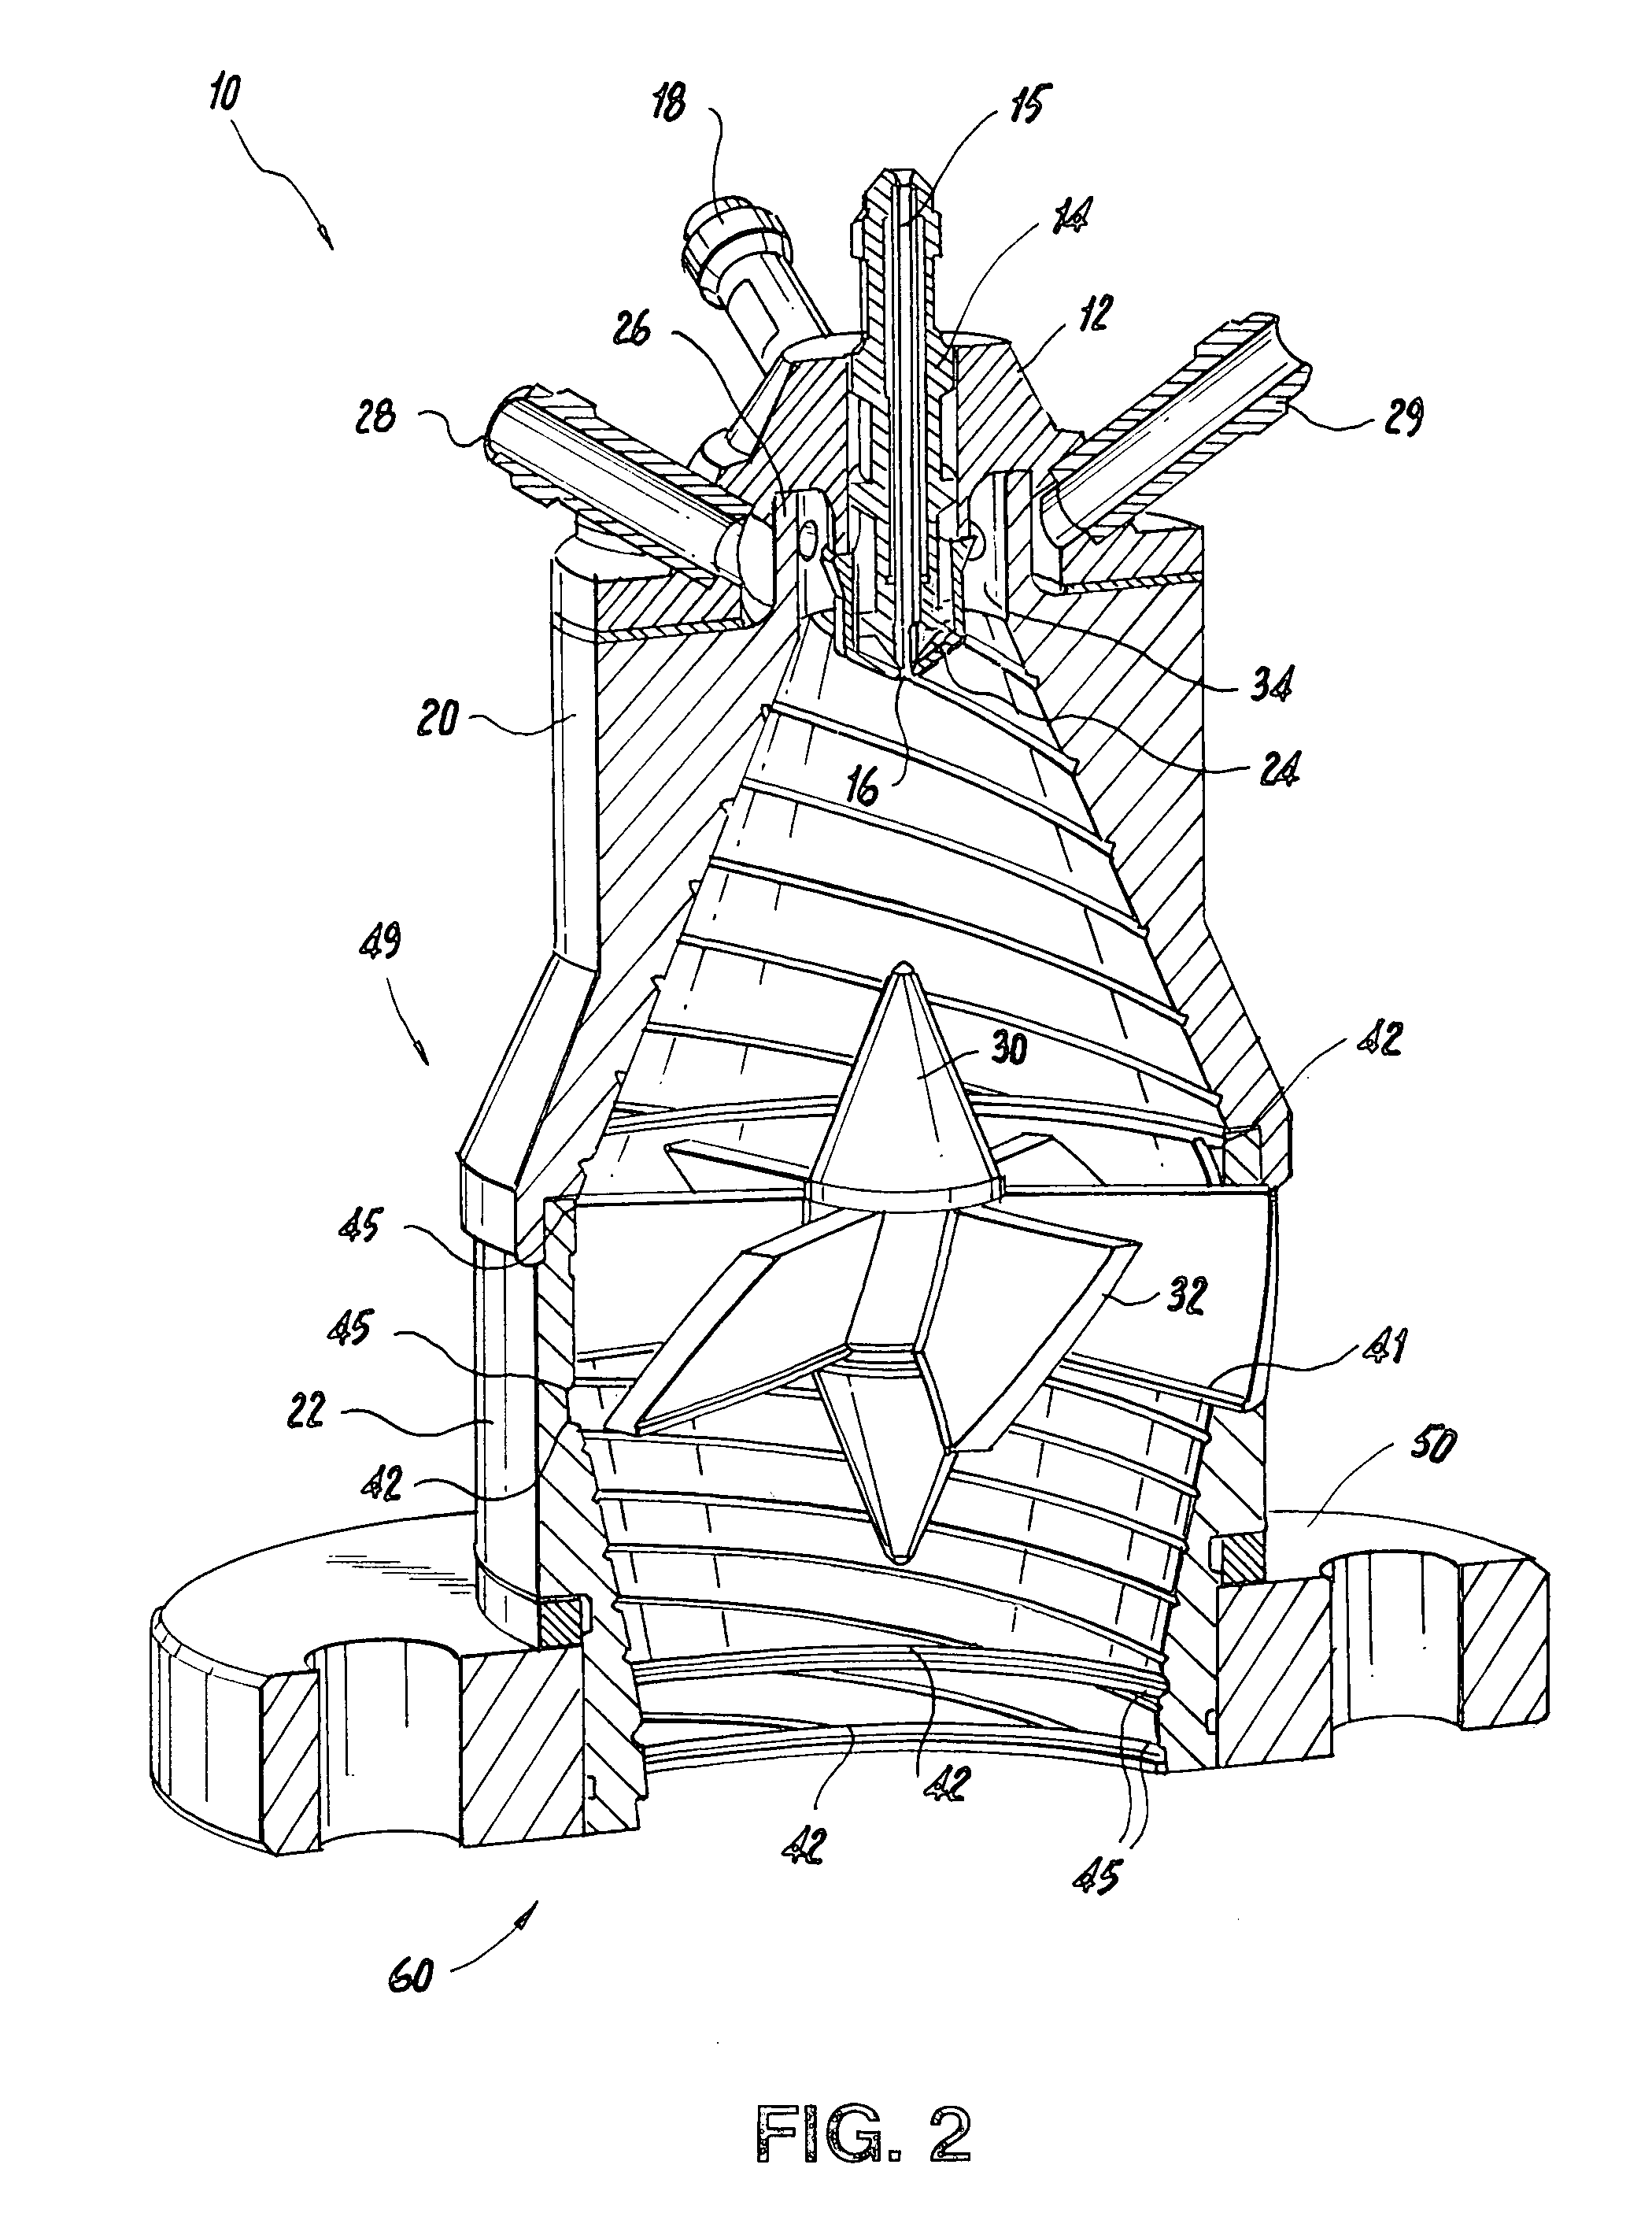 Integrated fuel injection and mixing systems for fuel reformers and methods of using the same